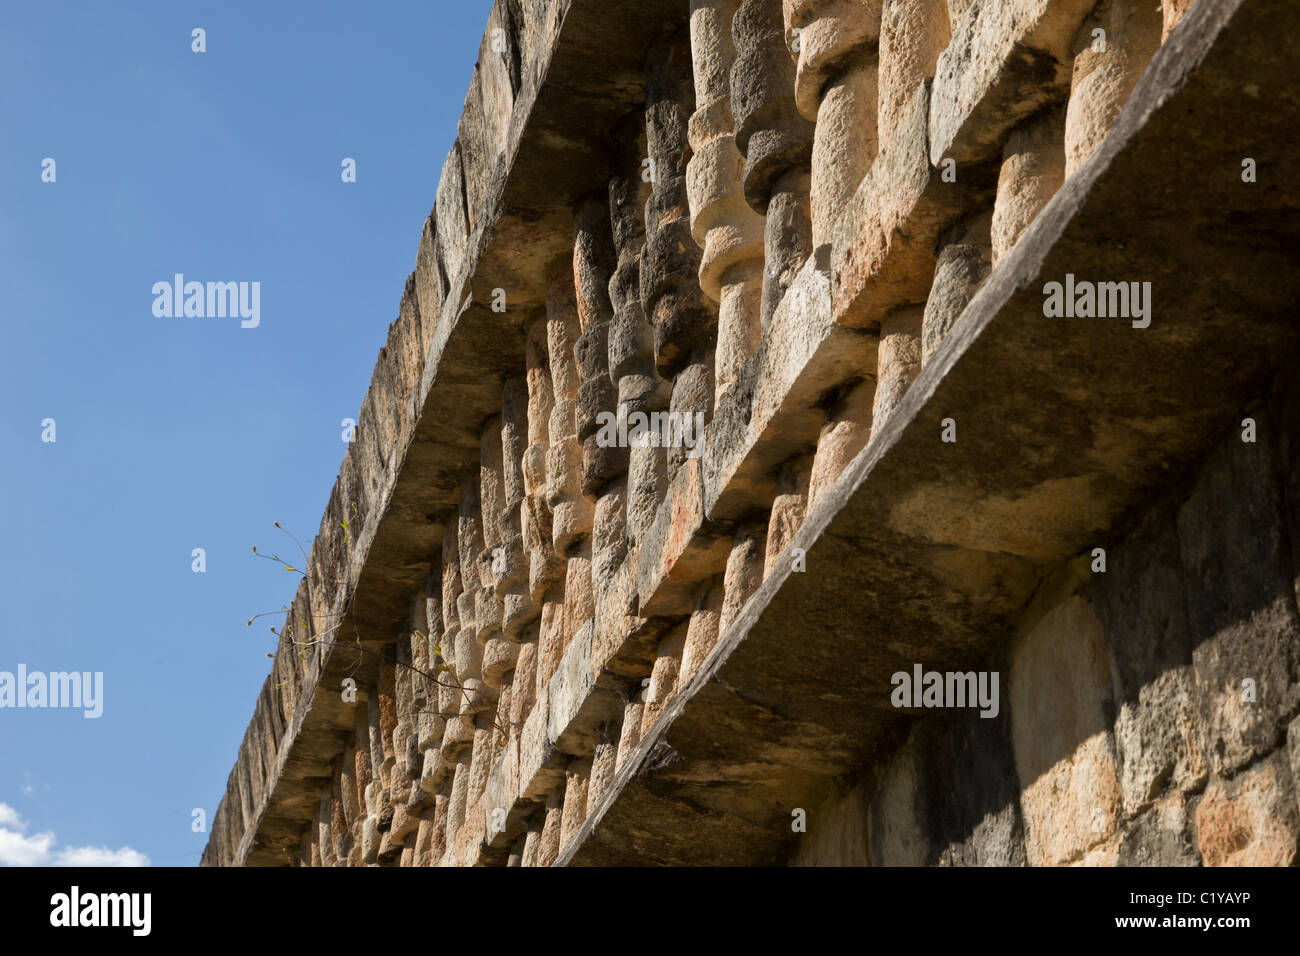 Roof detail of El Palacio or The Palace at the Late Classic Maya ruins of Sayil along the Puuc Route, Yucatan, Mexico. Stock Photo